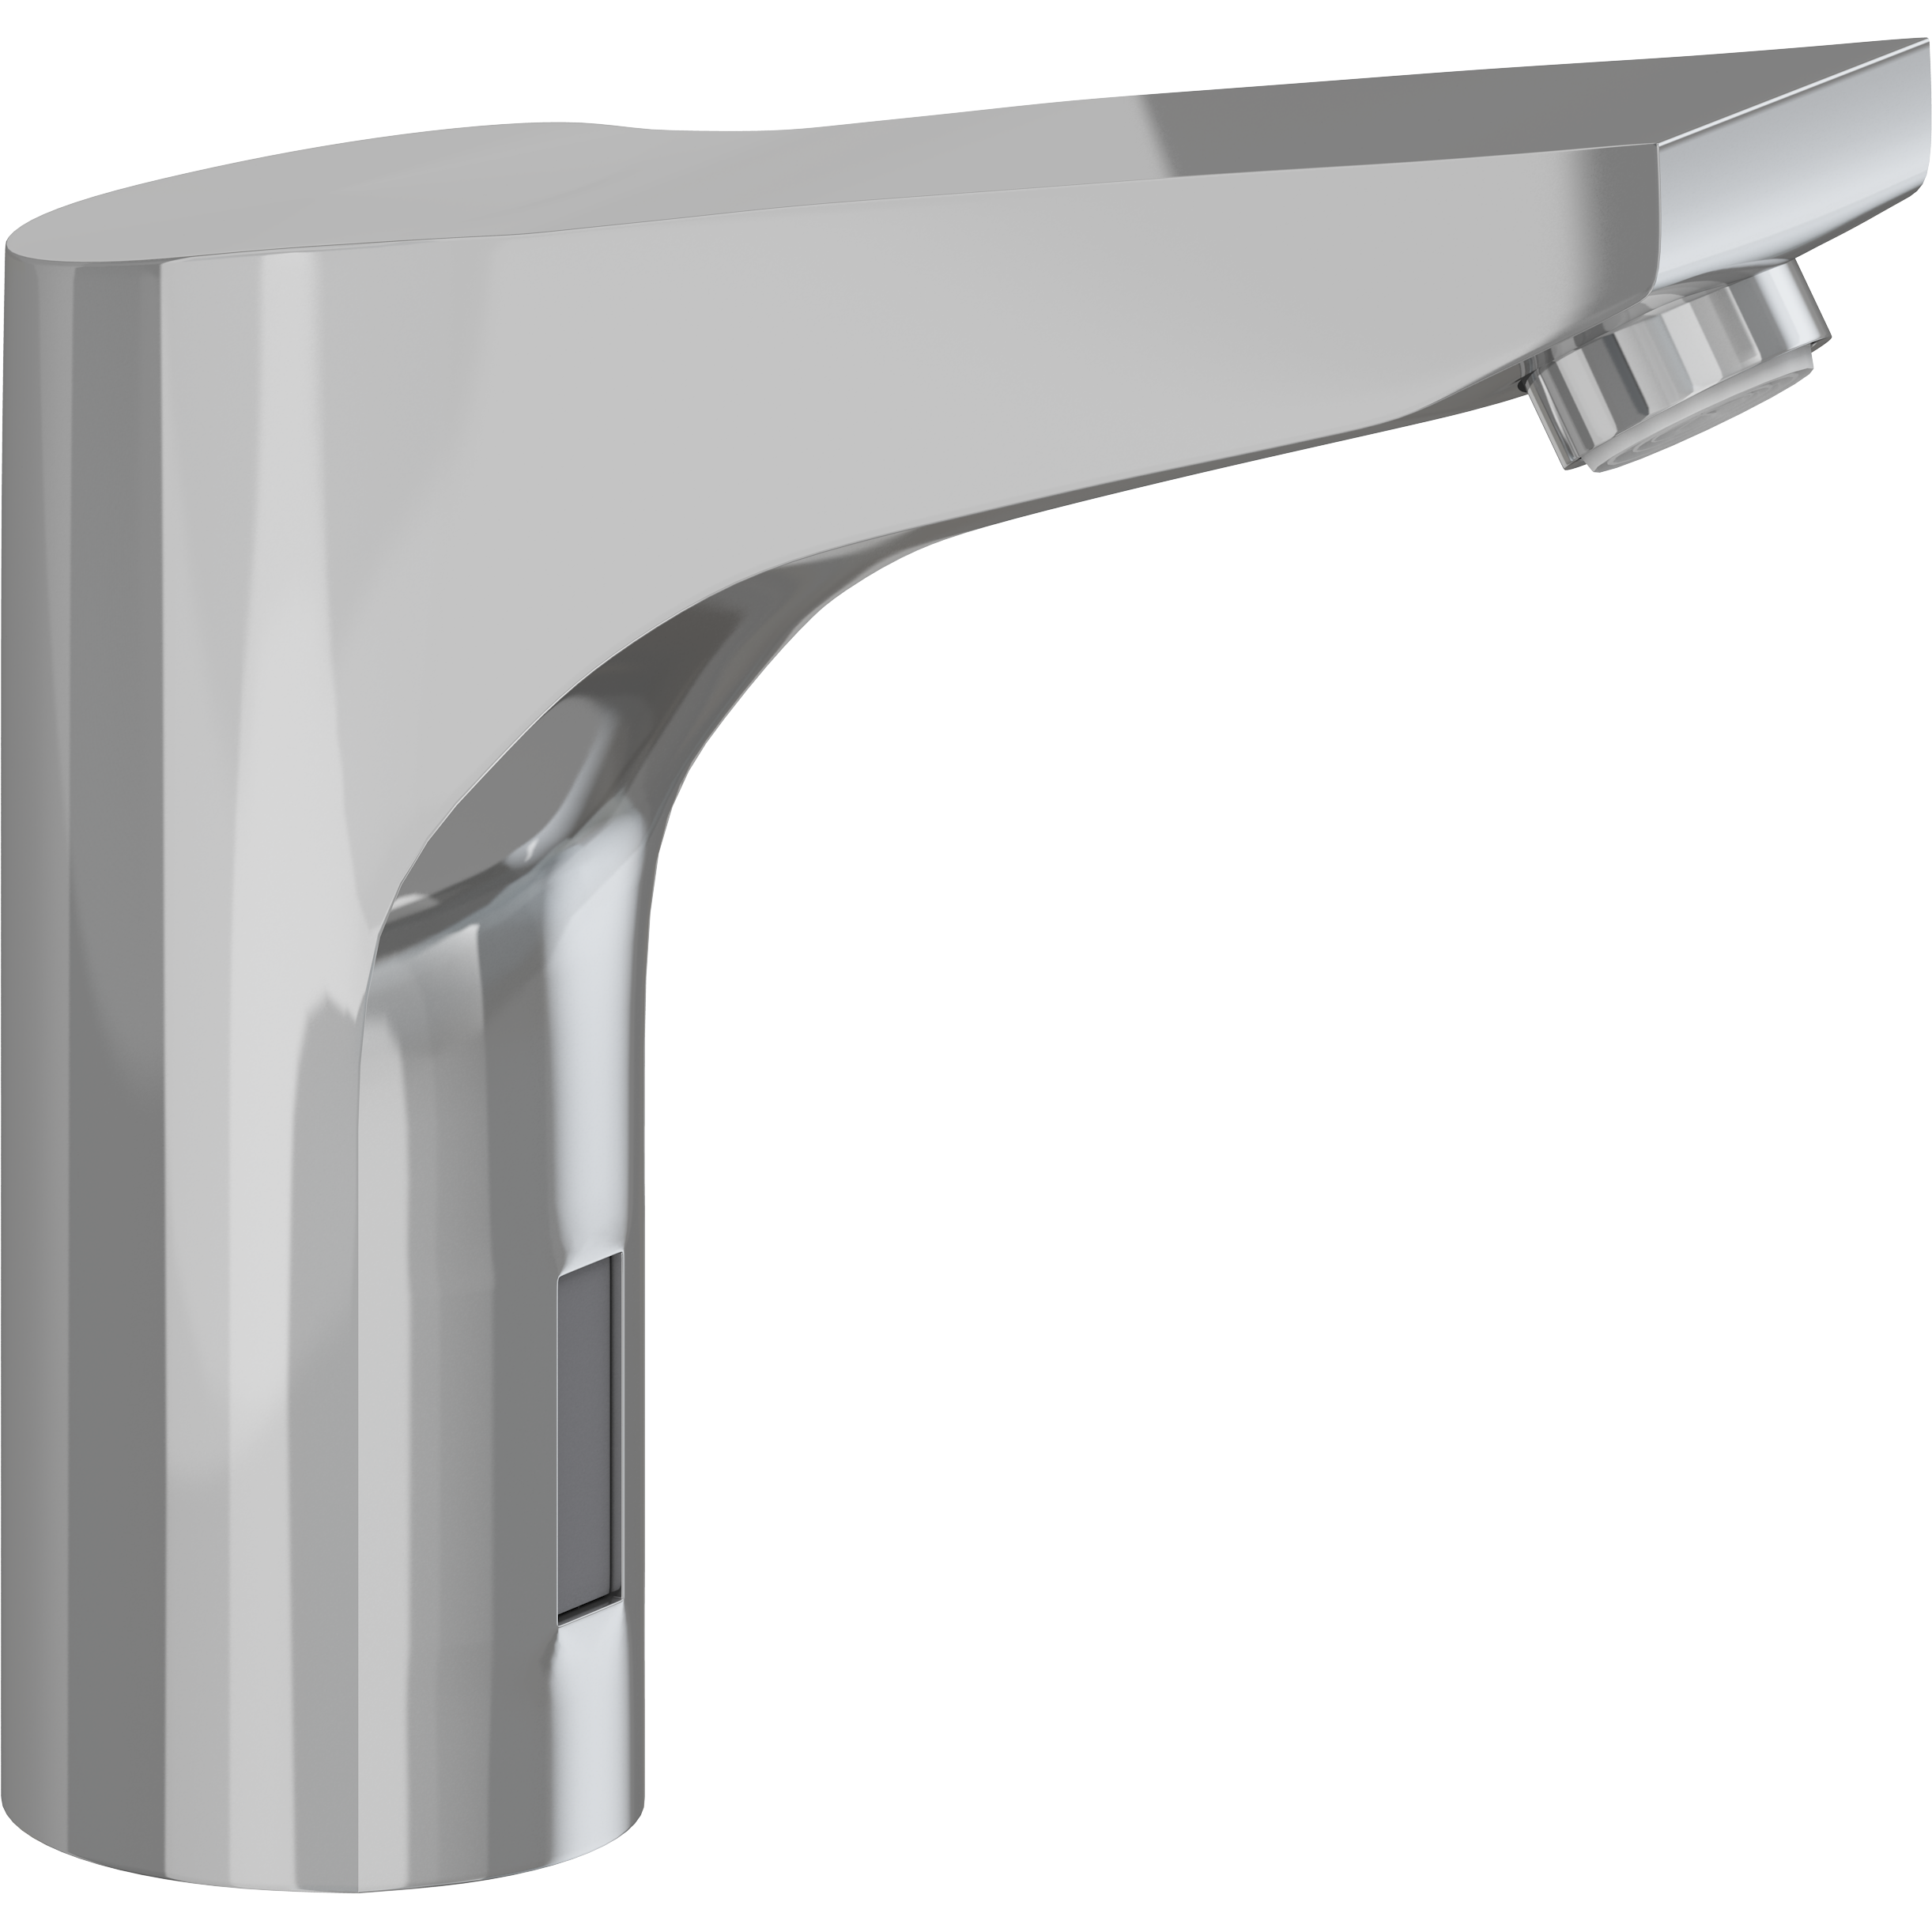 Touchless wash basin mixer tap